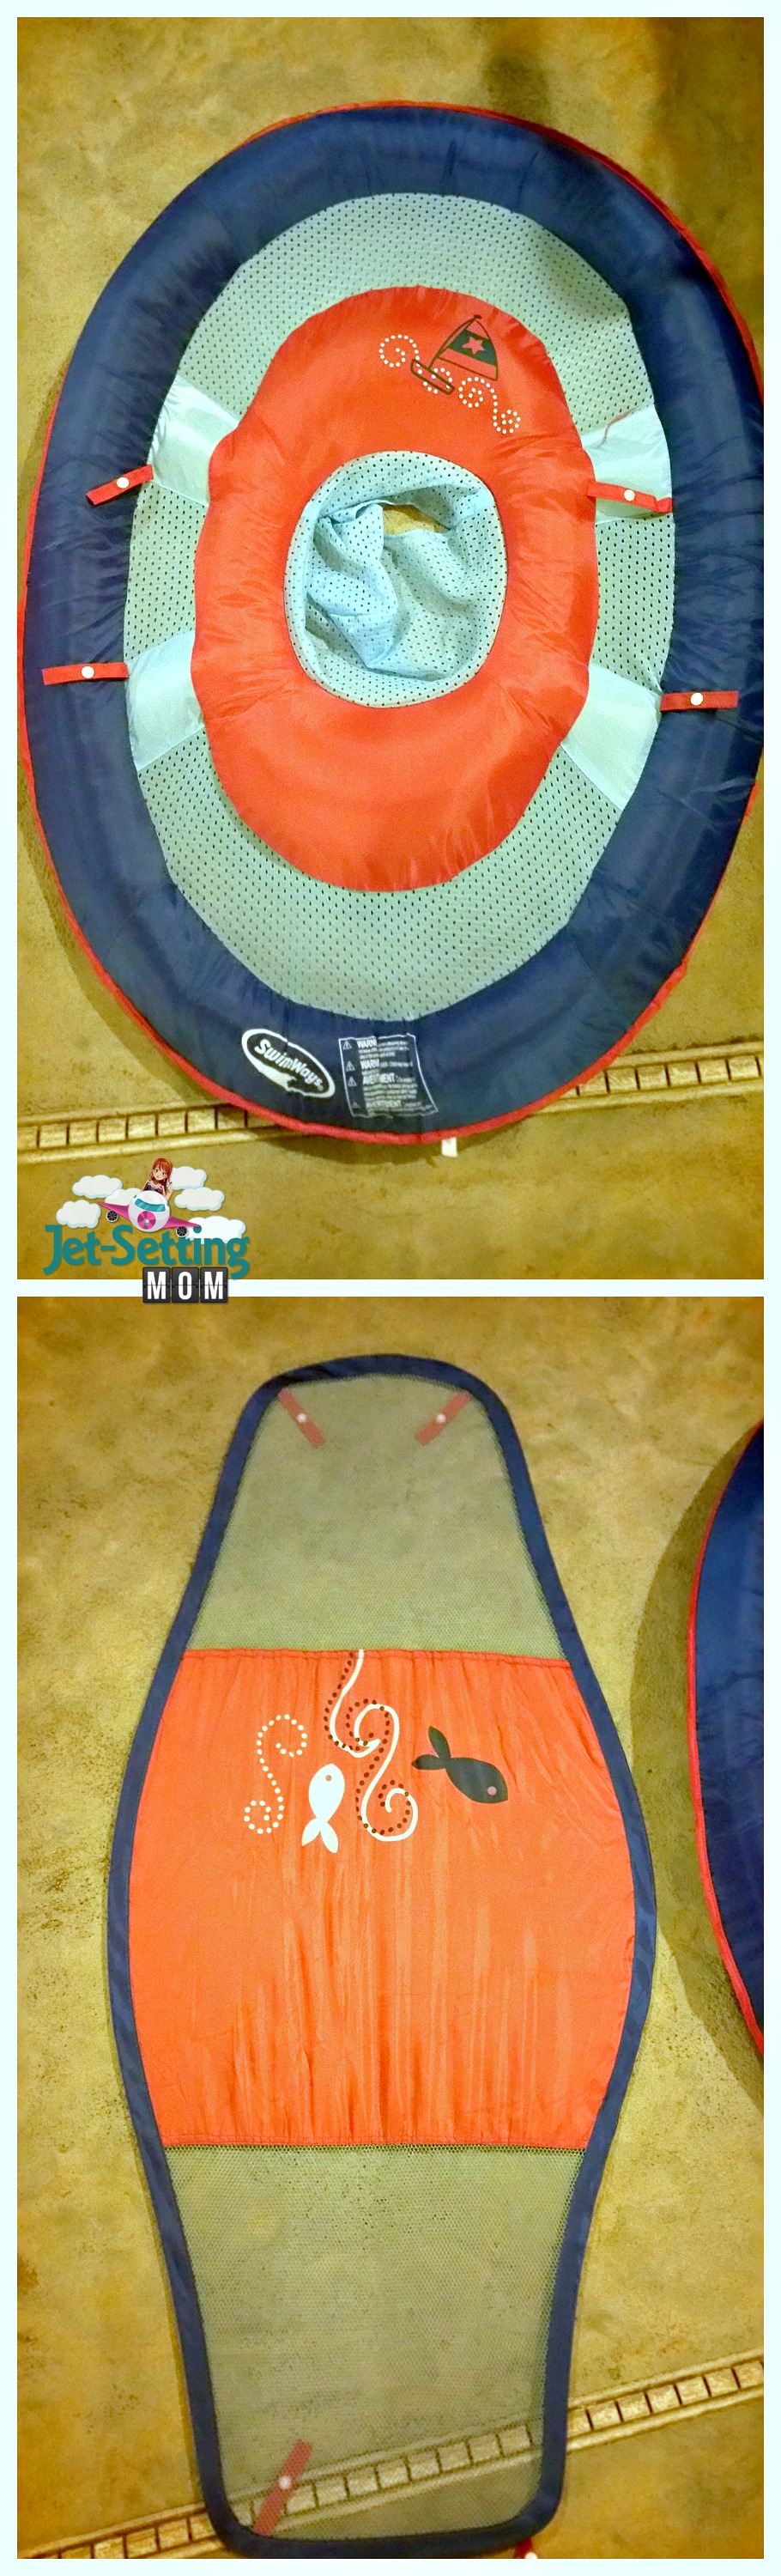 SwimWays Baby Spring Float is great for first swimmers! #IC #SwimWays #ad